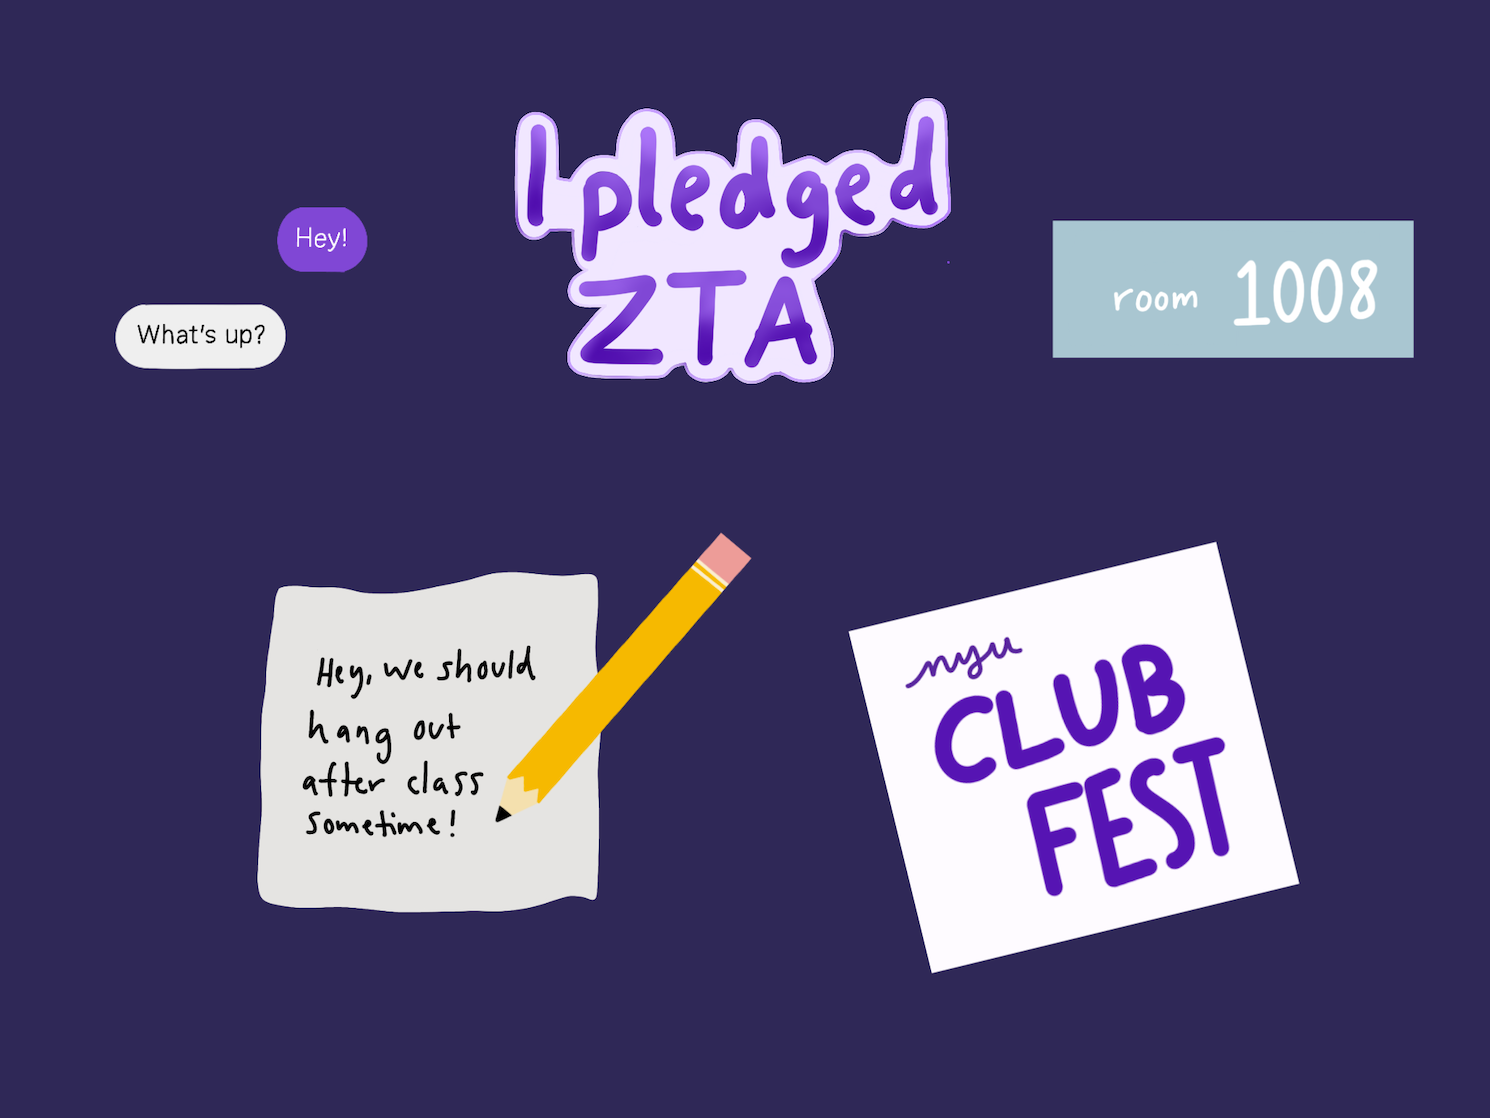 A collage of icons symbolizing college social life (from top to bottom, left to right): a simple “what’s up” text message, a symbol for joining Greek organizations reading “I pledge ZTA”, a room plaque and notes.